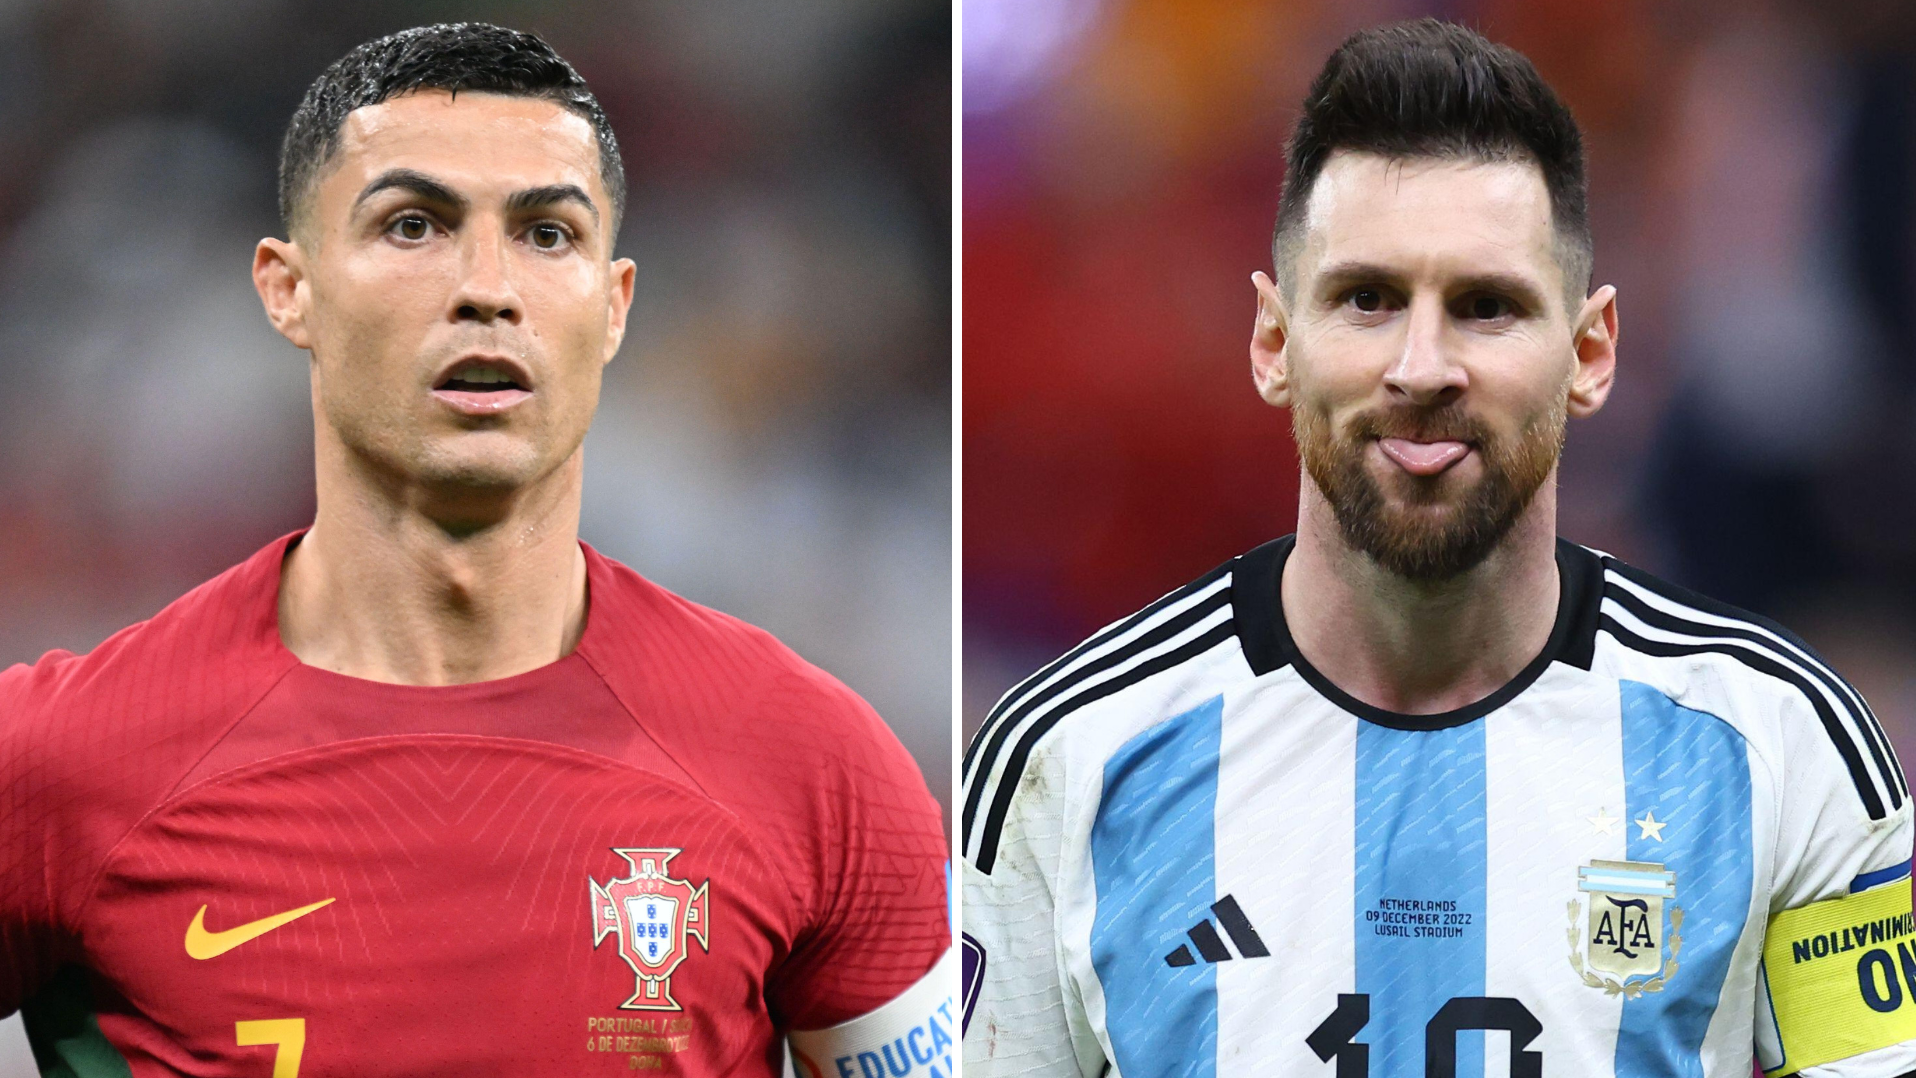 Champions League Final May Settle Ronaldo-Messi Debate - The New